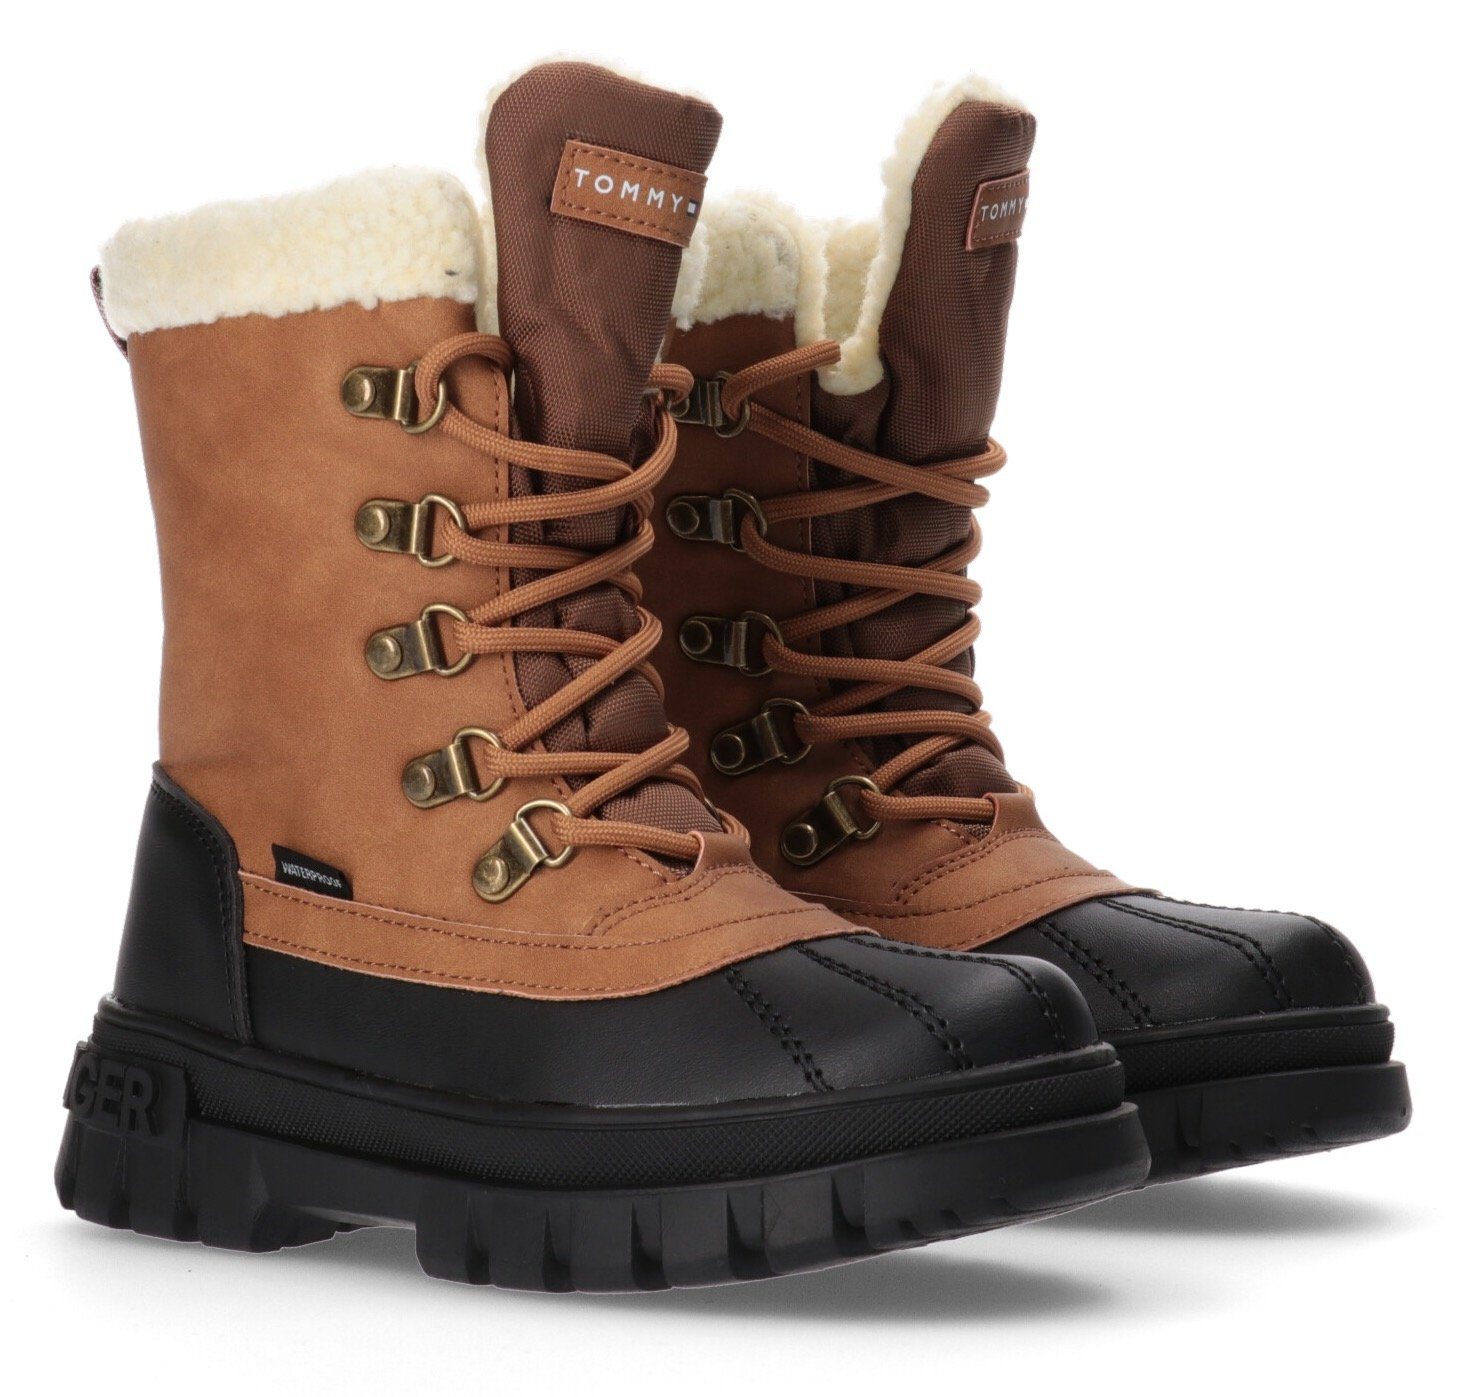 Tommy Hilfiger Thermostiefel LACE-UP BOOT Snowboots mit Warmfutter